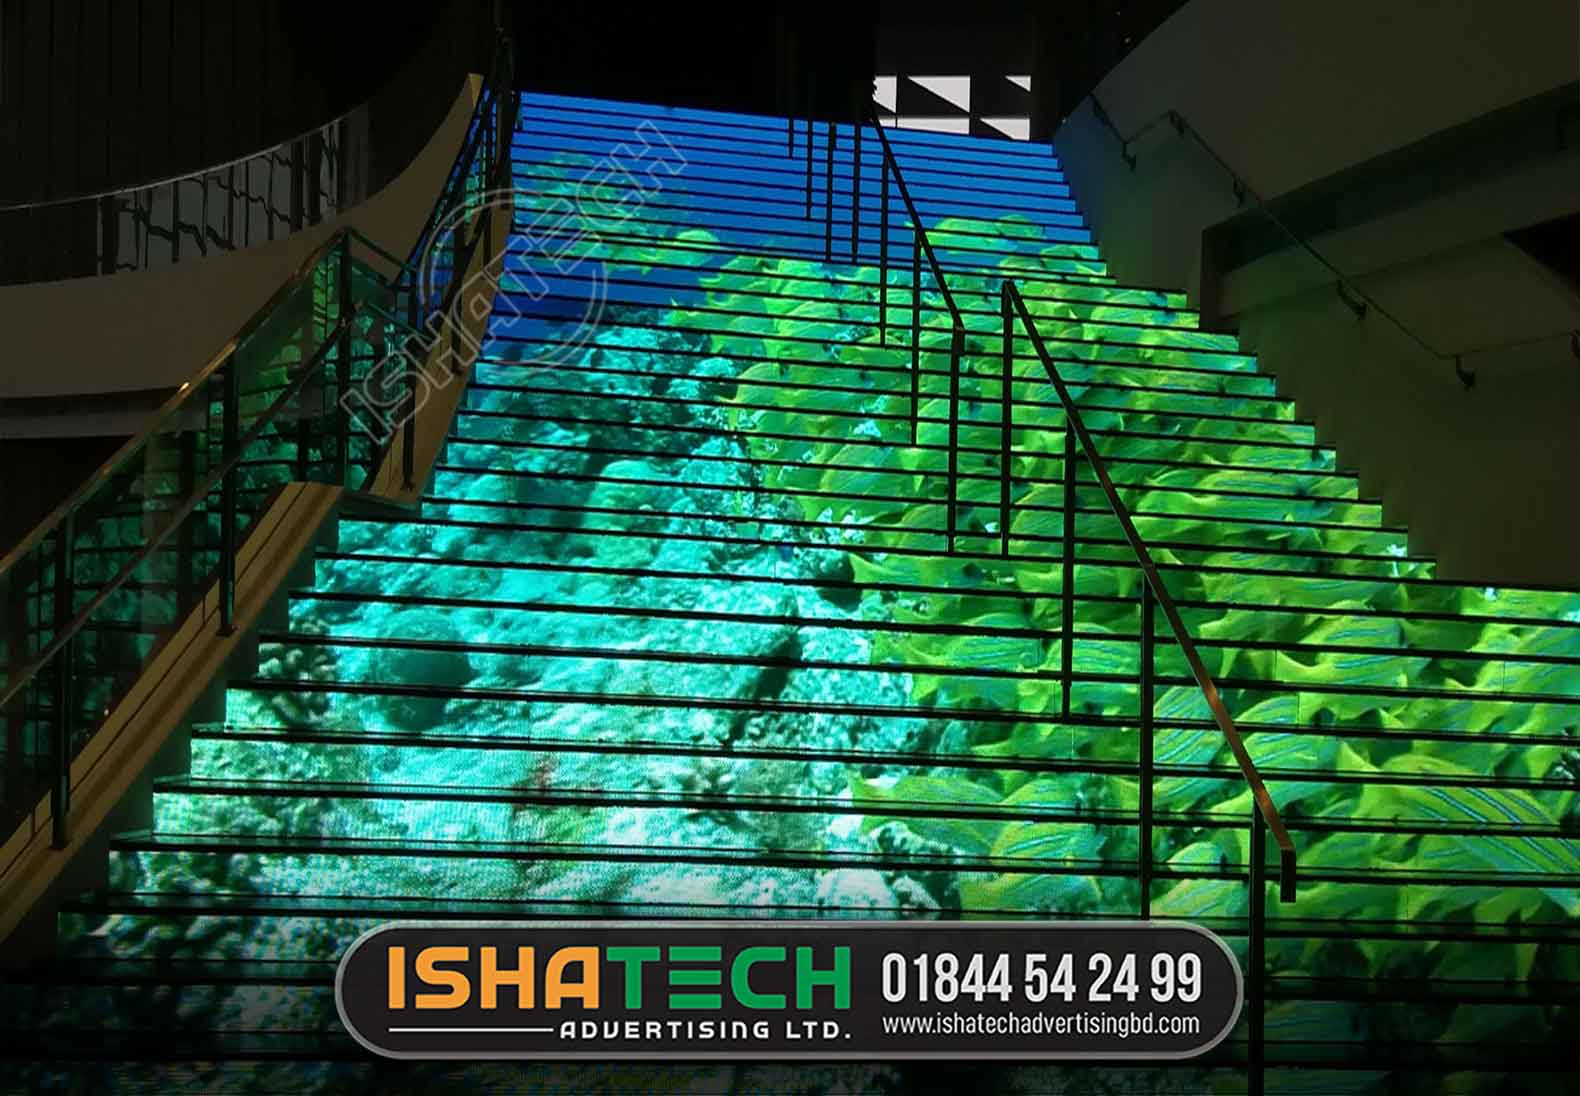 Video Times Stairs Fixed Led Display, Indoor, The Universe is endless It is Infinite It is Boundless In this age of Metaverse and Digital Life digitising your outdoor space can pave your way towards creation of a Tech Savvy Organisation Imagine the possibilities Get tailormade solutions for digitising your Outdoor Space through our specially curated Outdoor LED Display Technology Get your tailor made solution for your space and get assured with our unmatchable tech support Outdoor LED Display Systems are used at a lot of places such as Construction Projects Government Arenas Corporate Houses Retail Houses Institutions Digital OOH Spaces and whatnot USPs of our Outdoor LED Display Technology Ranging Pixel Customised Fitting Water Proof Energy Efficient Tech Weather Proof Systems Remote Operation Software Support 24x7 O amp M support Tailormade Solutions